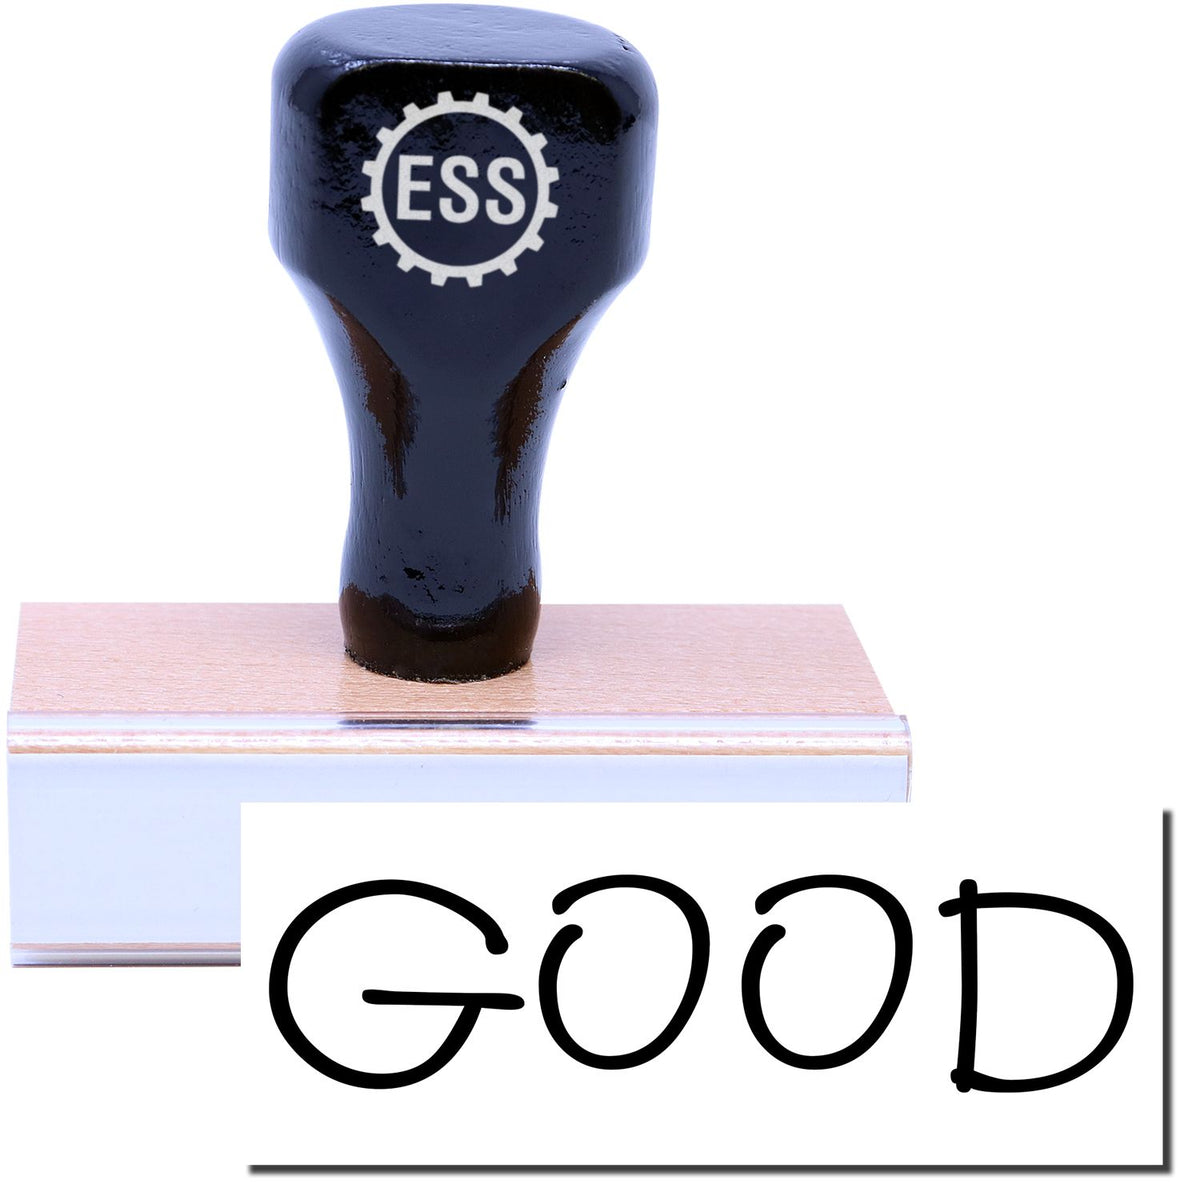 A stock office rubber stamp with a stamped image showing how the text &quot;GOOD&quot; in a large font is displayed after stamping.